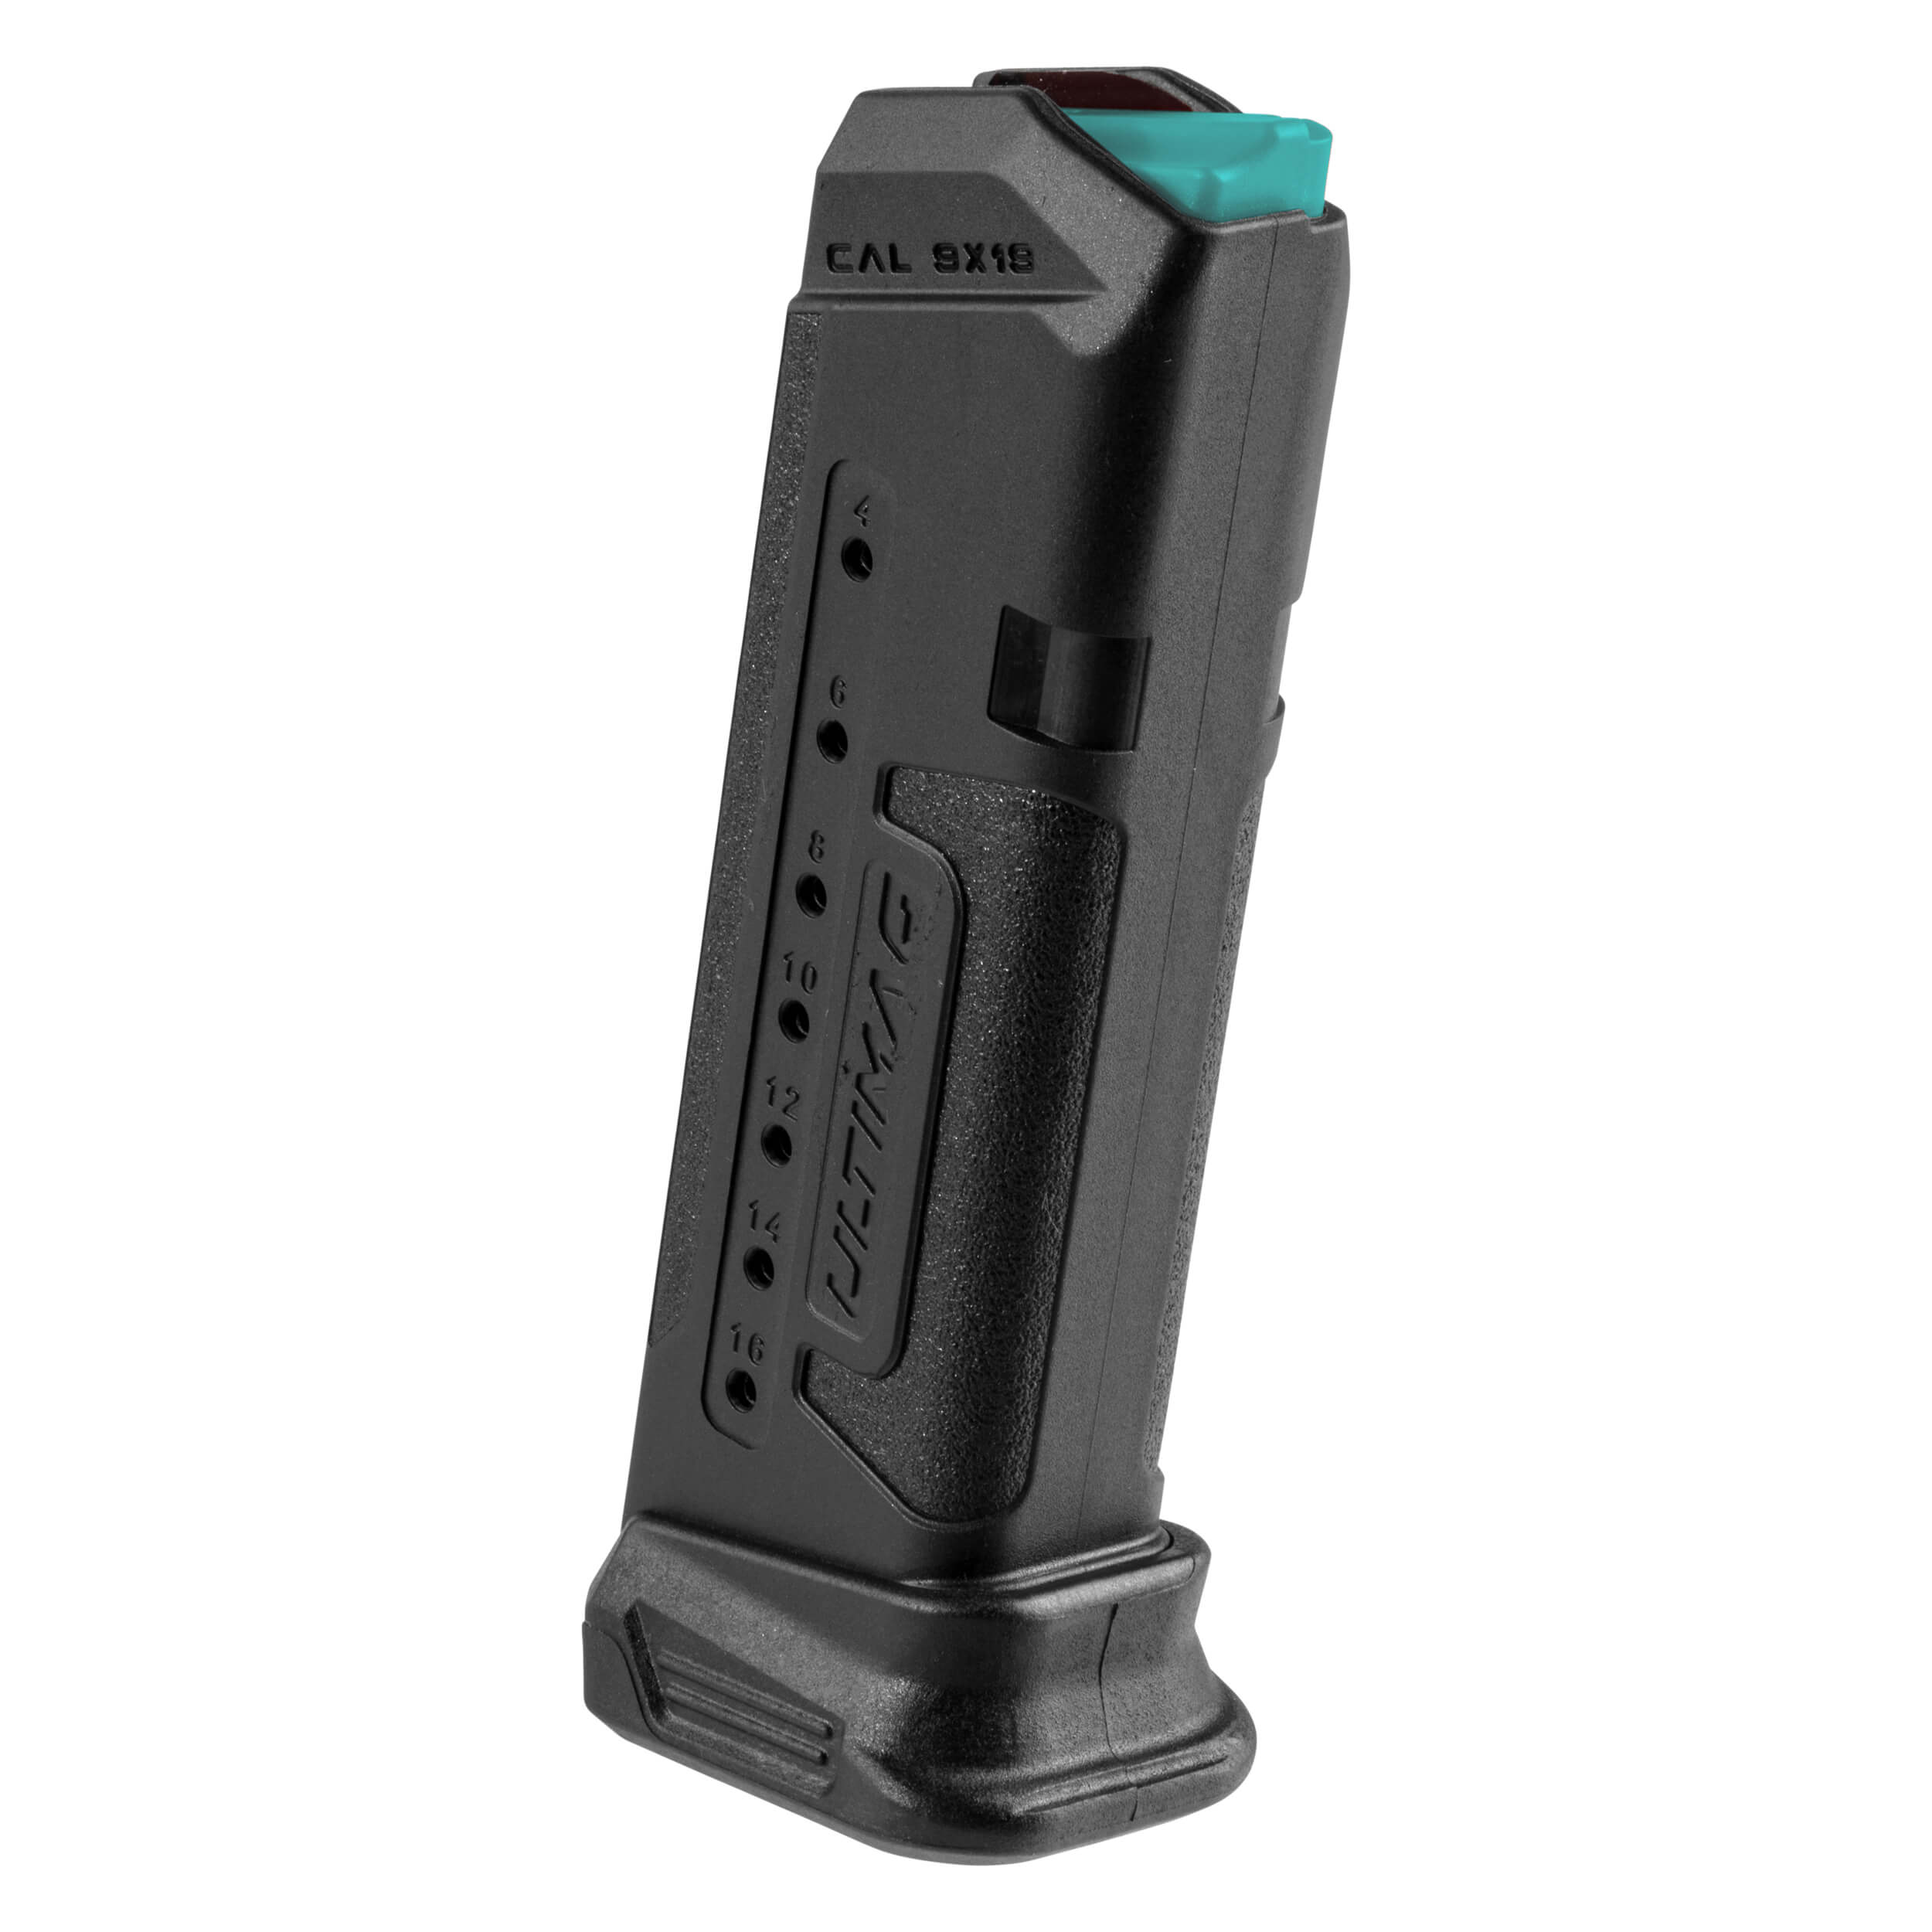 Ultimag Magazine for Glock 19 9mm (16 rounds)